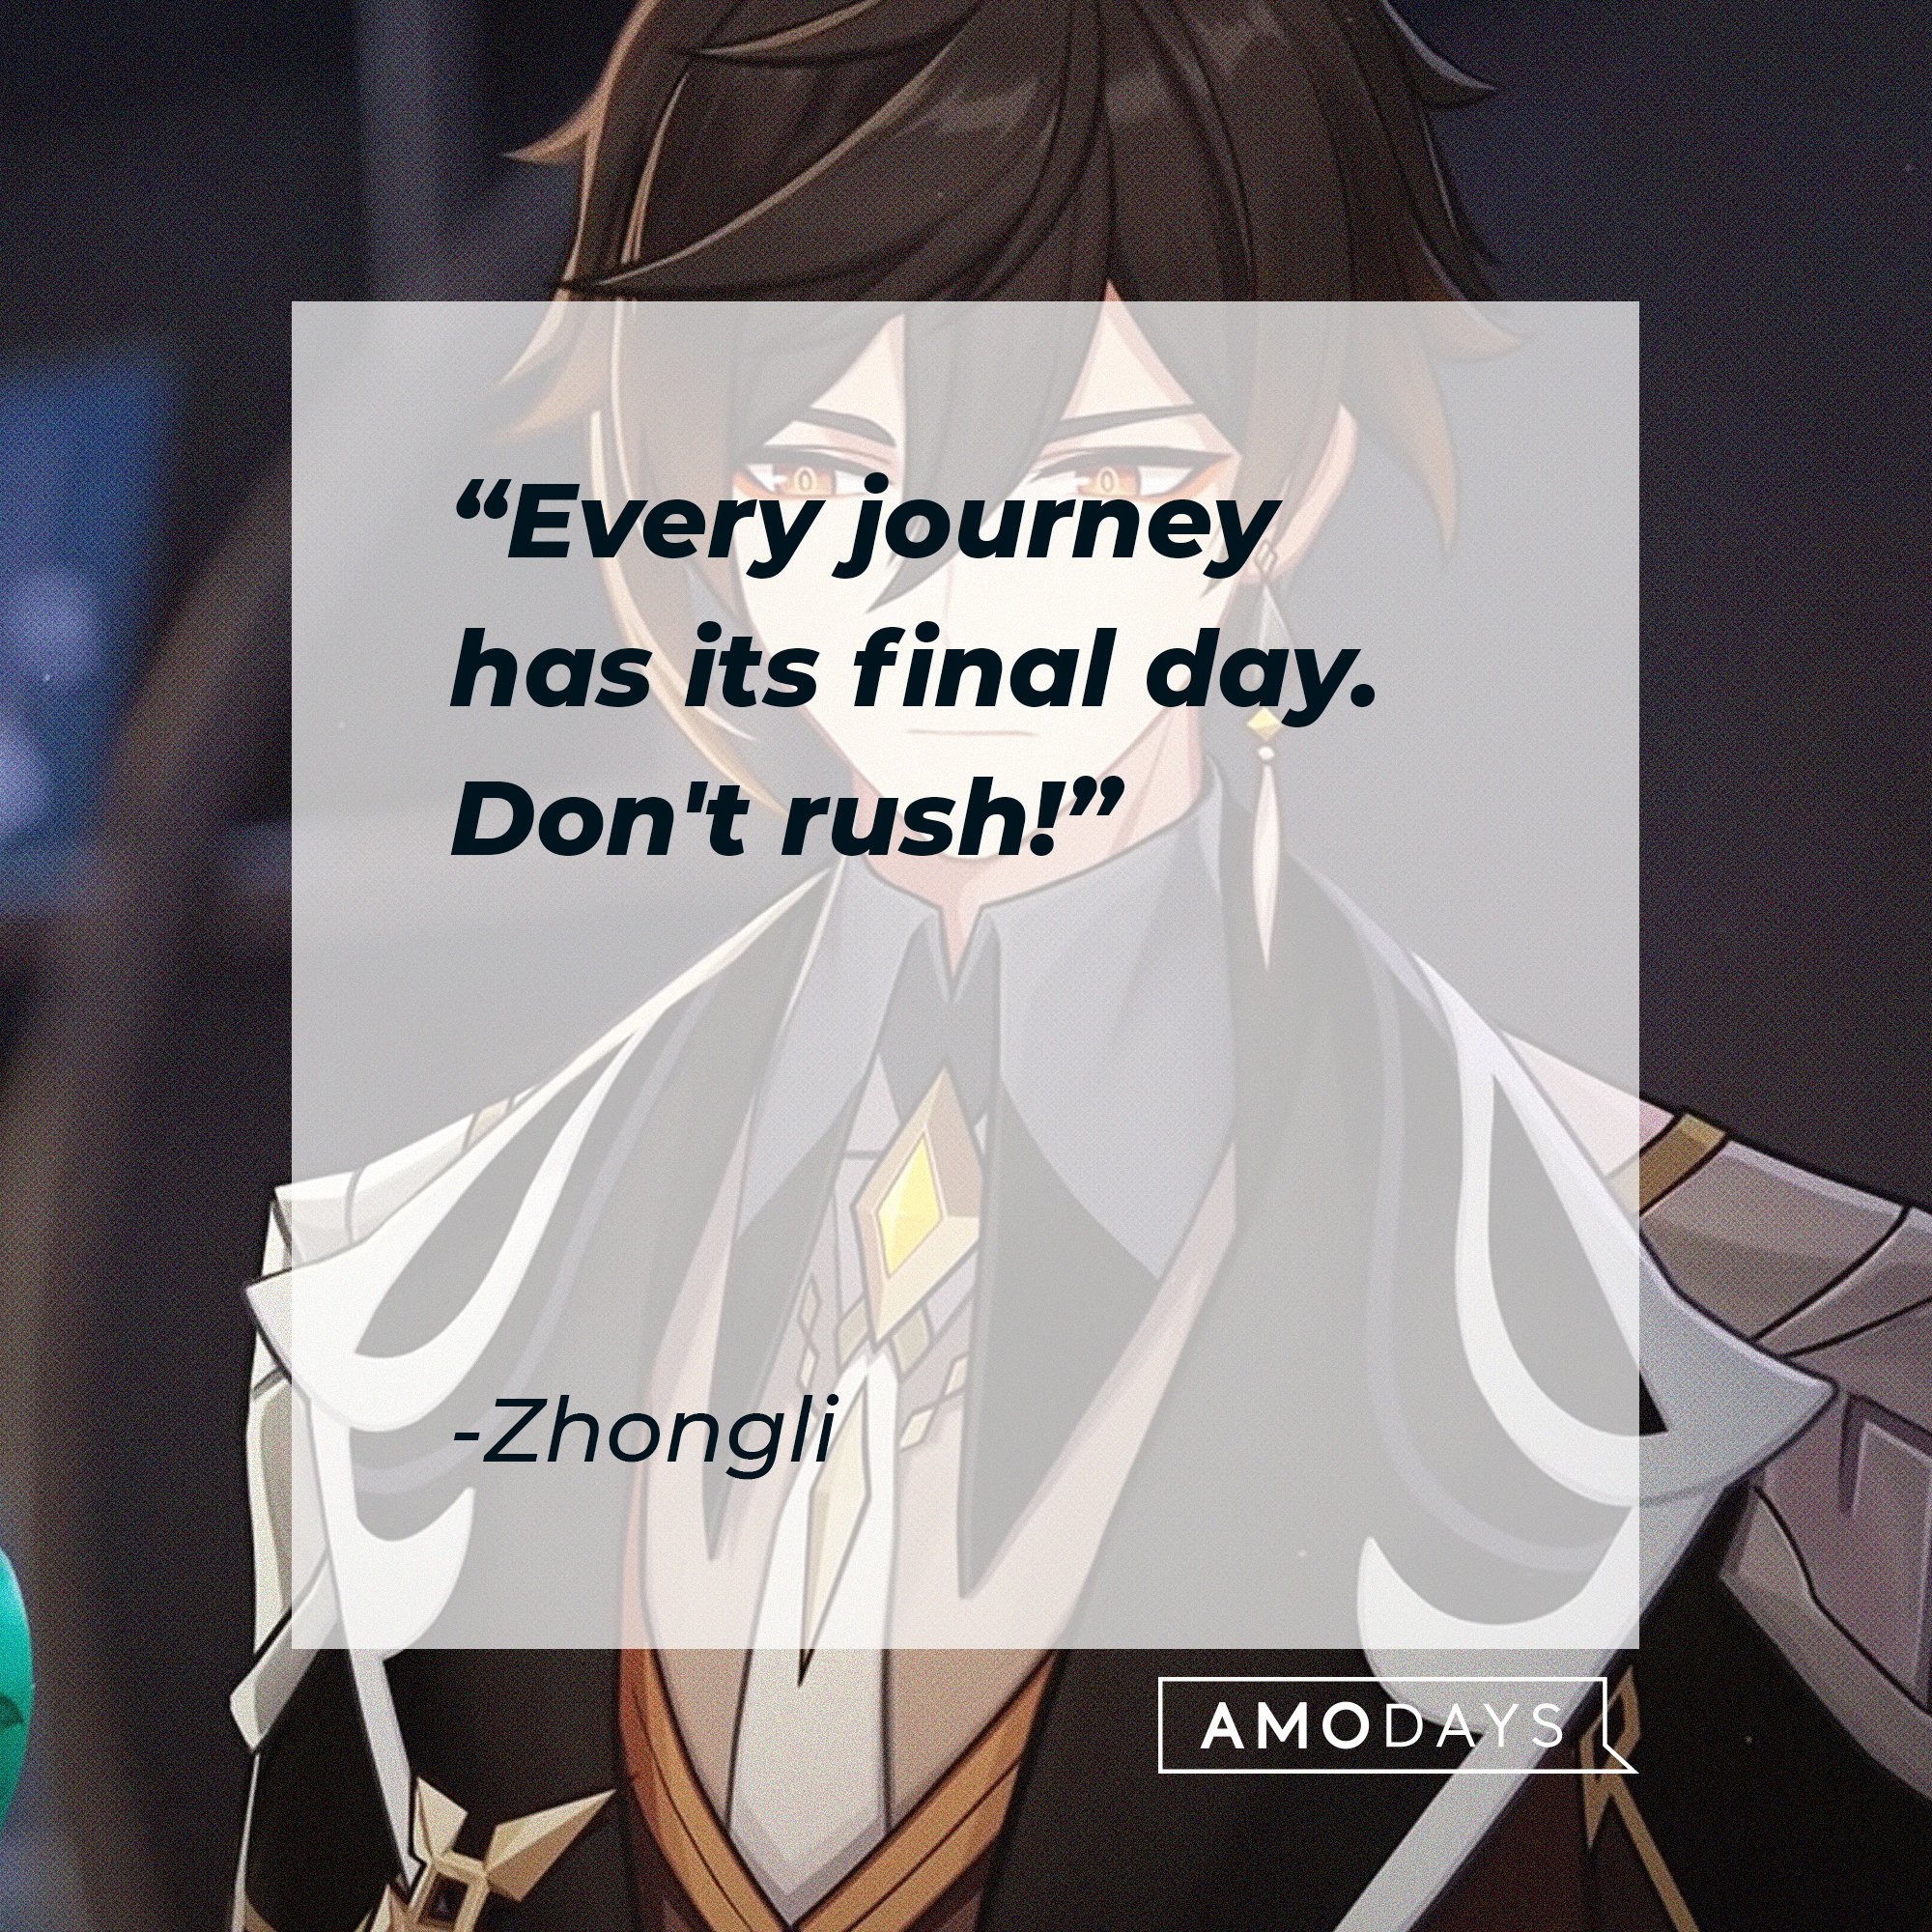 Zhongli’s quote: "Every journey has its final day. Don't rush!" | Image: AmoDays